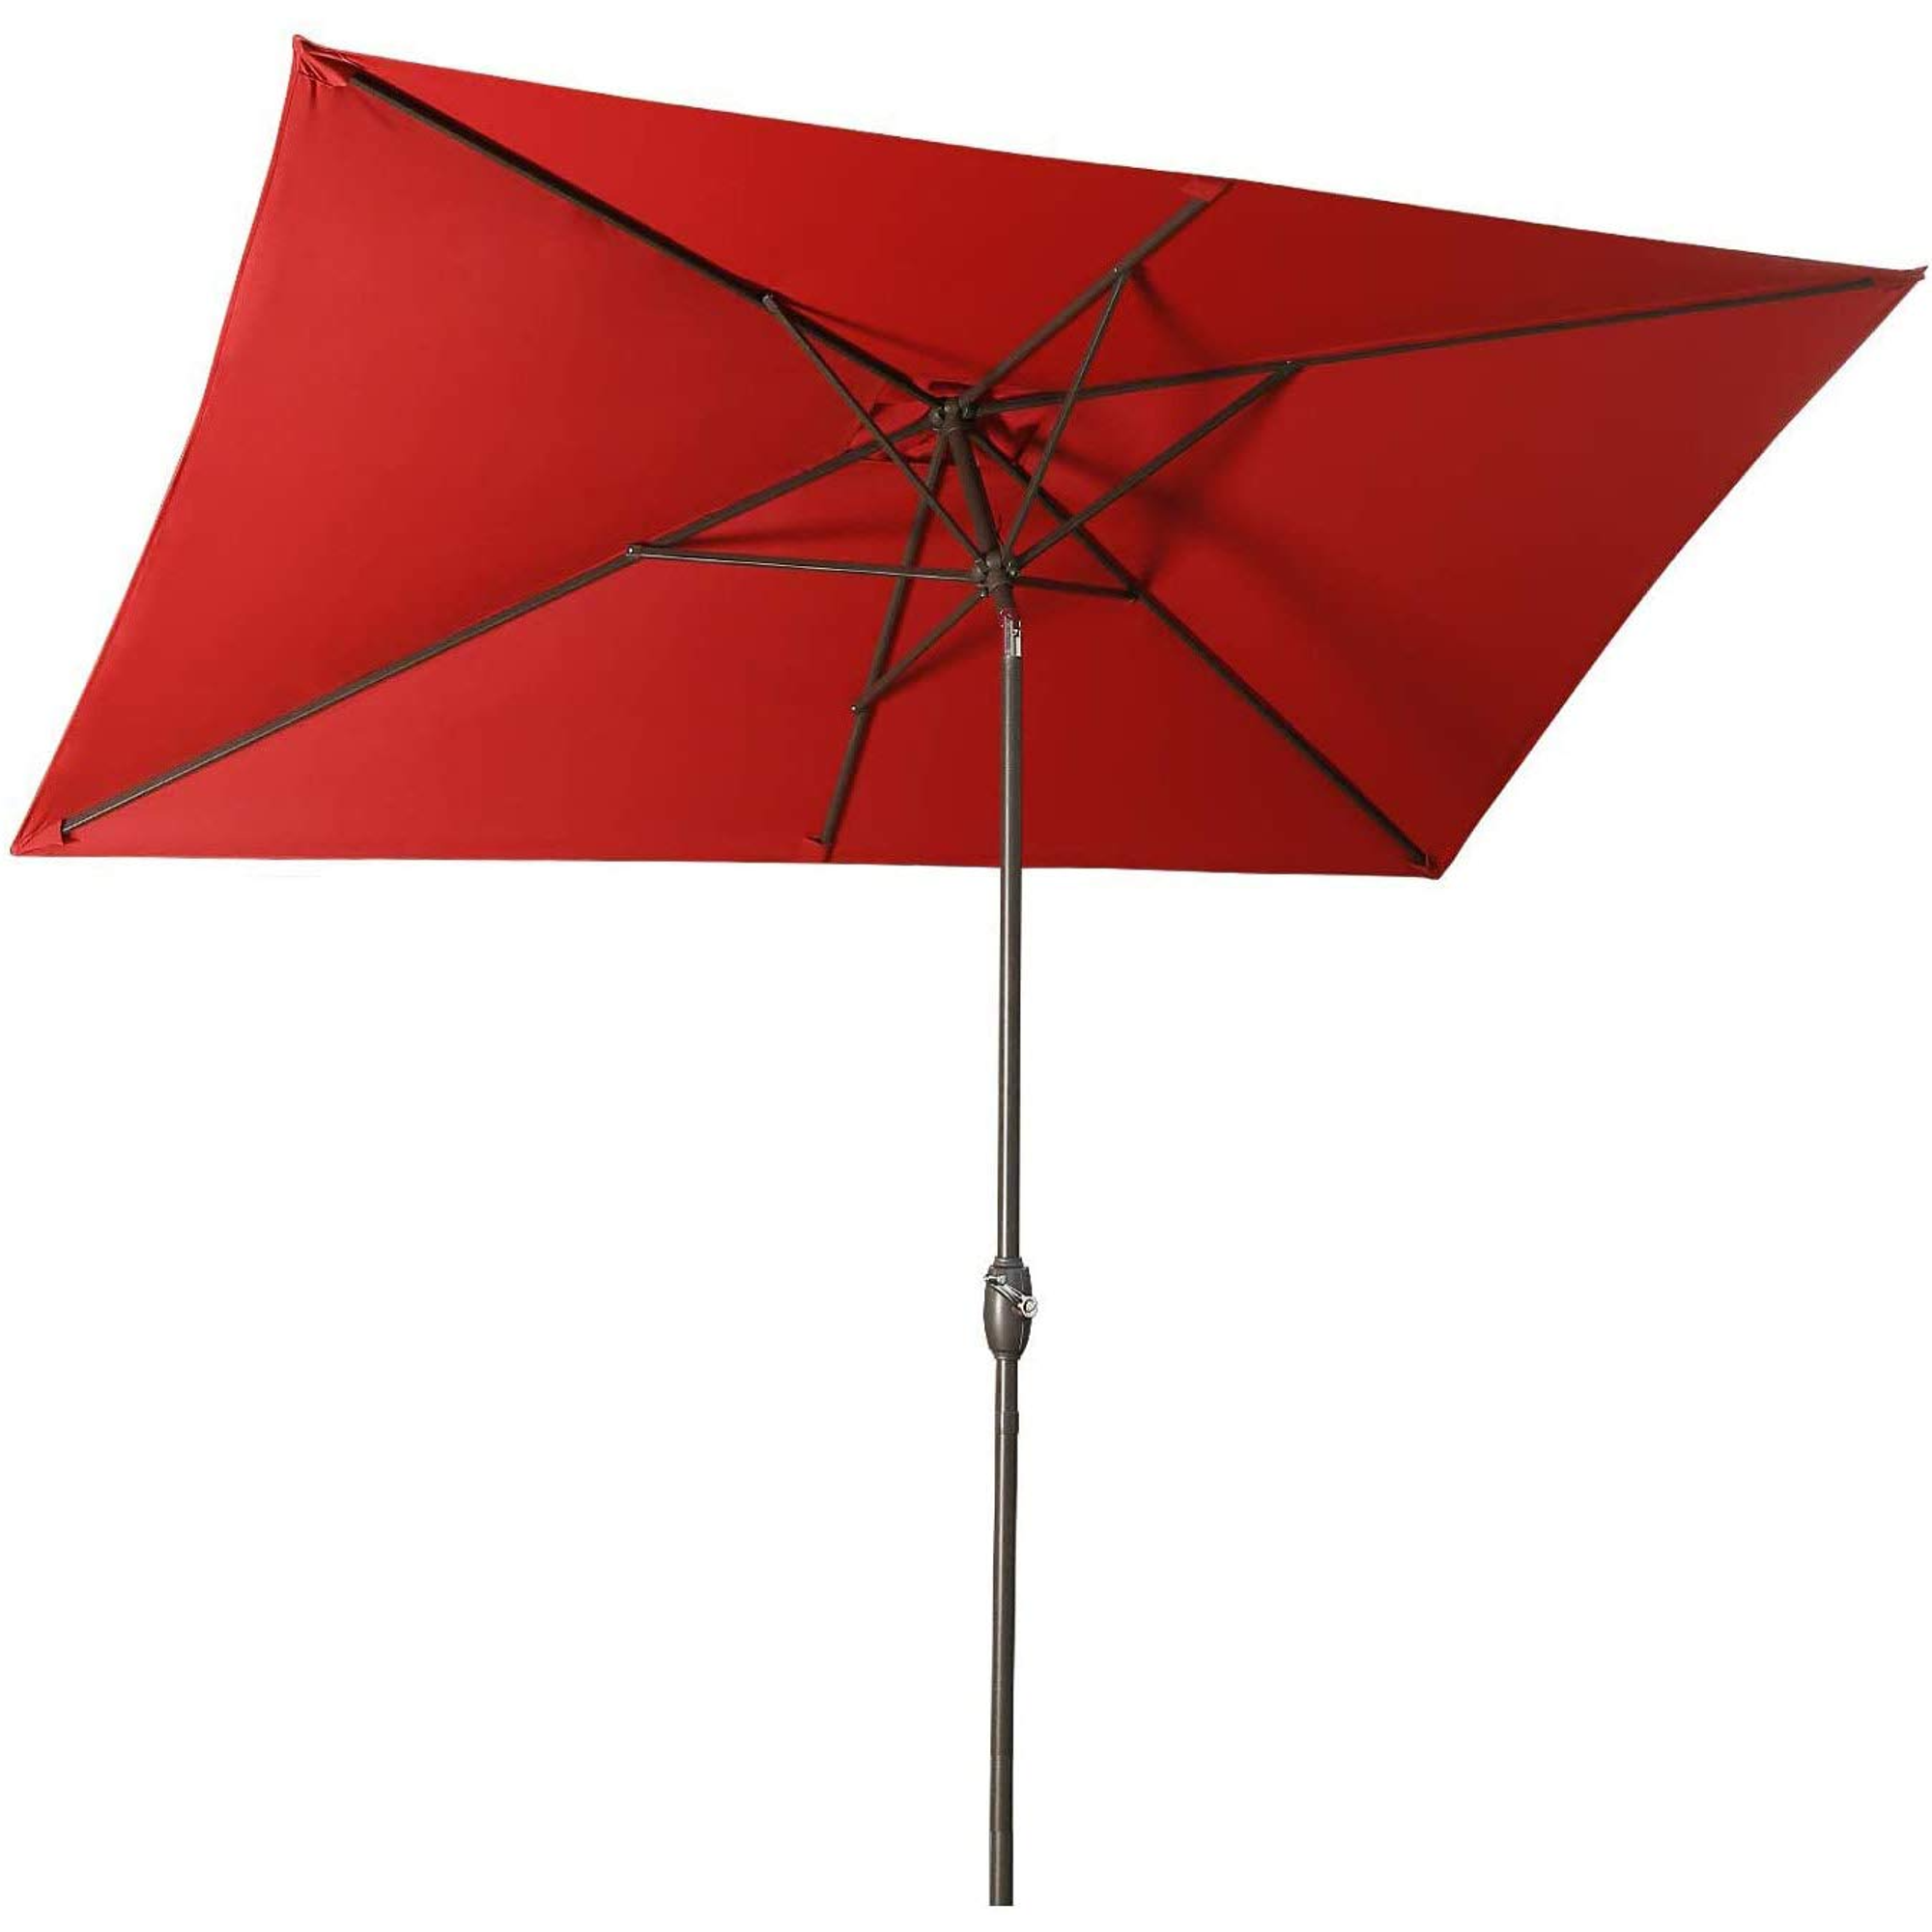 Rectangular-Patio-Umbrella-6.5-ft.-x-10-ft.-with-Tilt,-Crank-and-6-Sturdy-Ribs-for-Deck,-Lawn,-Pool-in-RED-Furniture/outdoor/Umbrellas-&-Sunshades